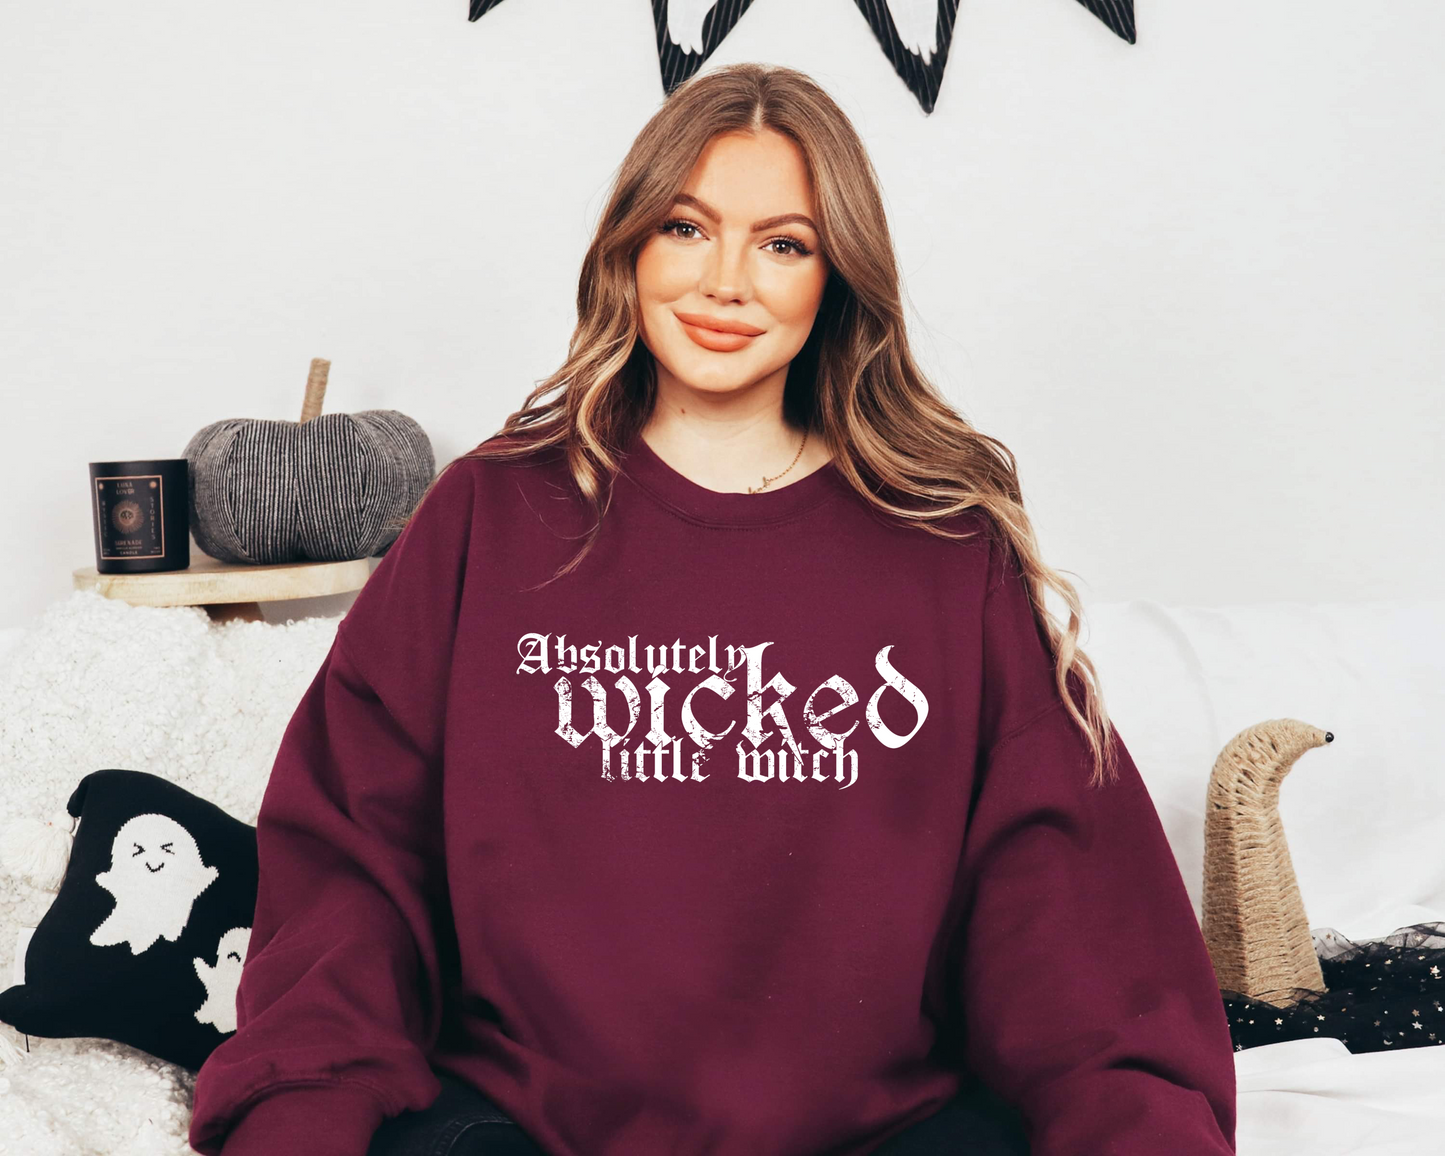 Absolutely Wicked Little Witch Crewneck - White Decal - Licensed